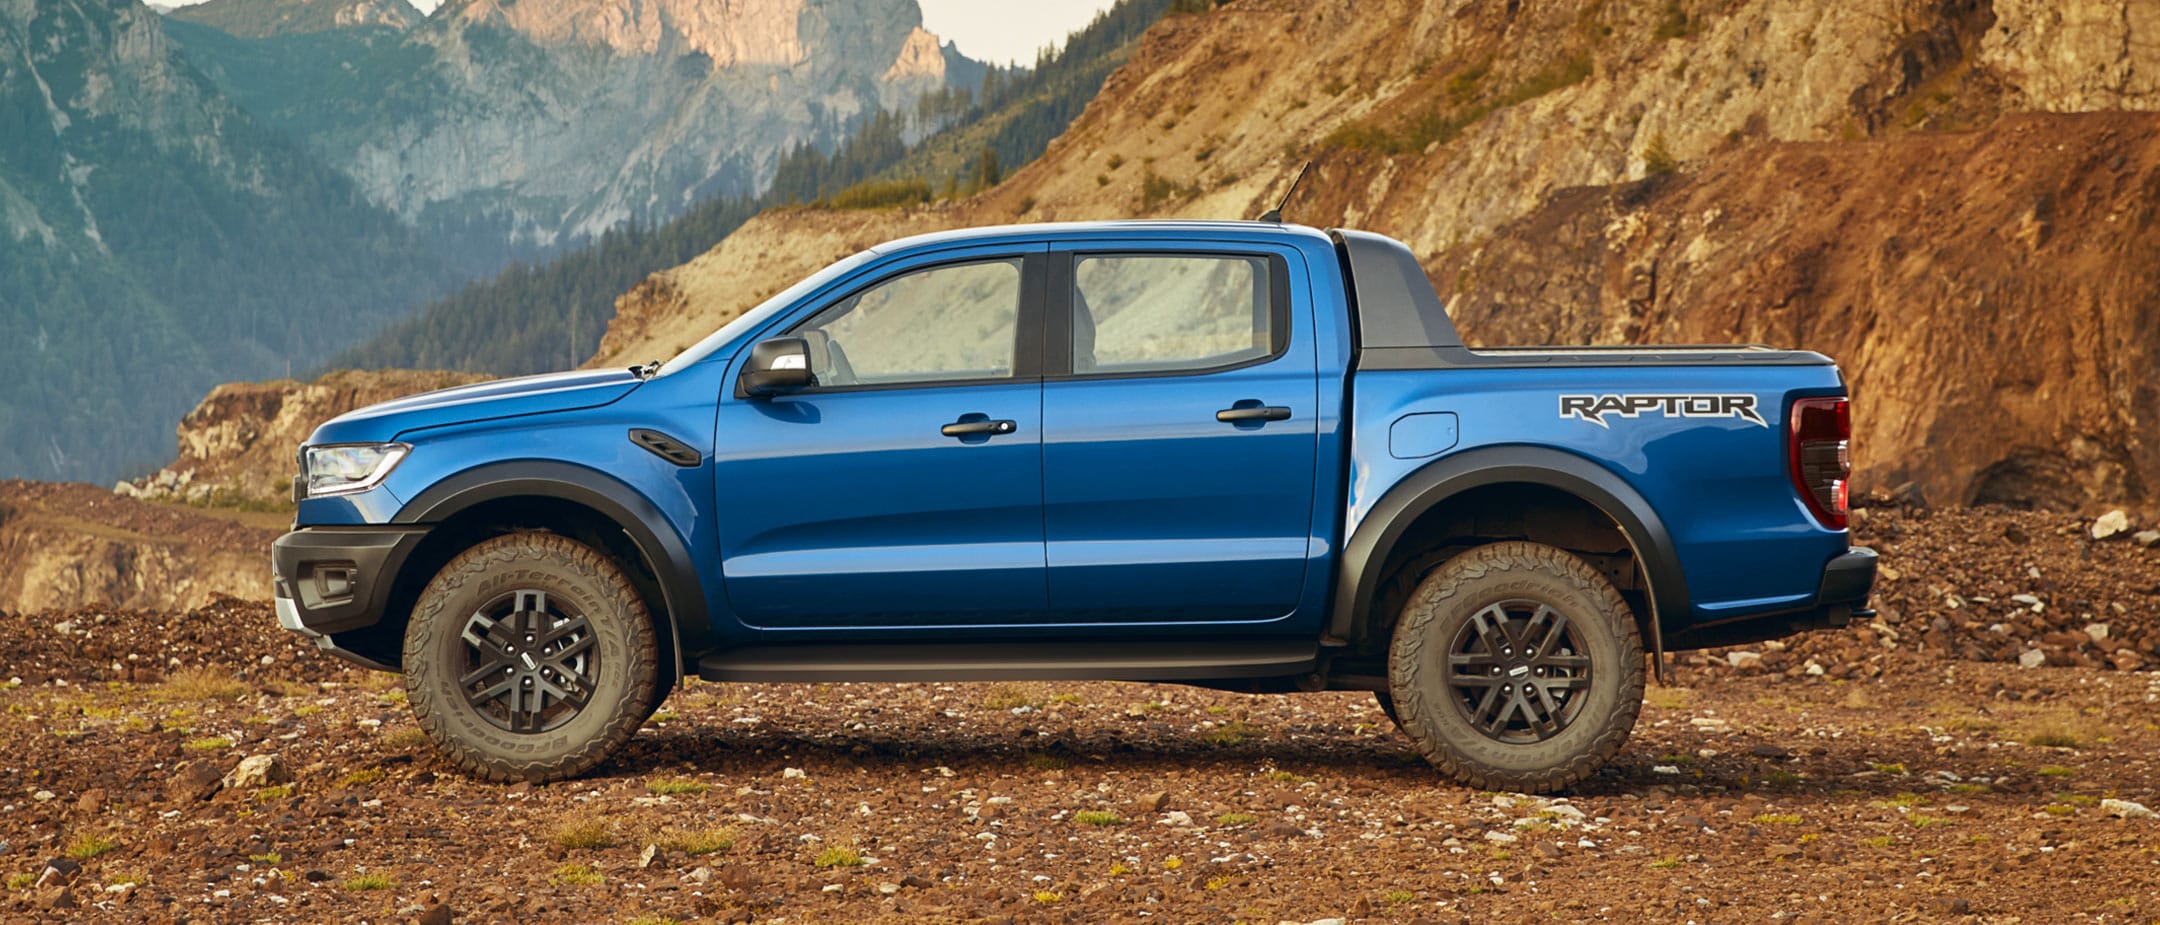 Ranger Raptor parked with mountains backdrop